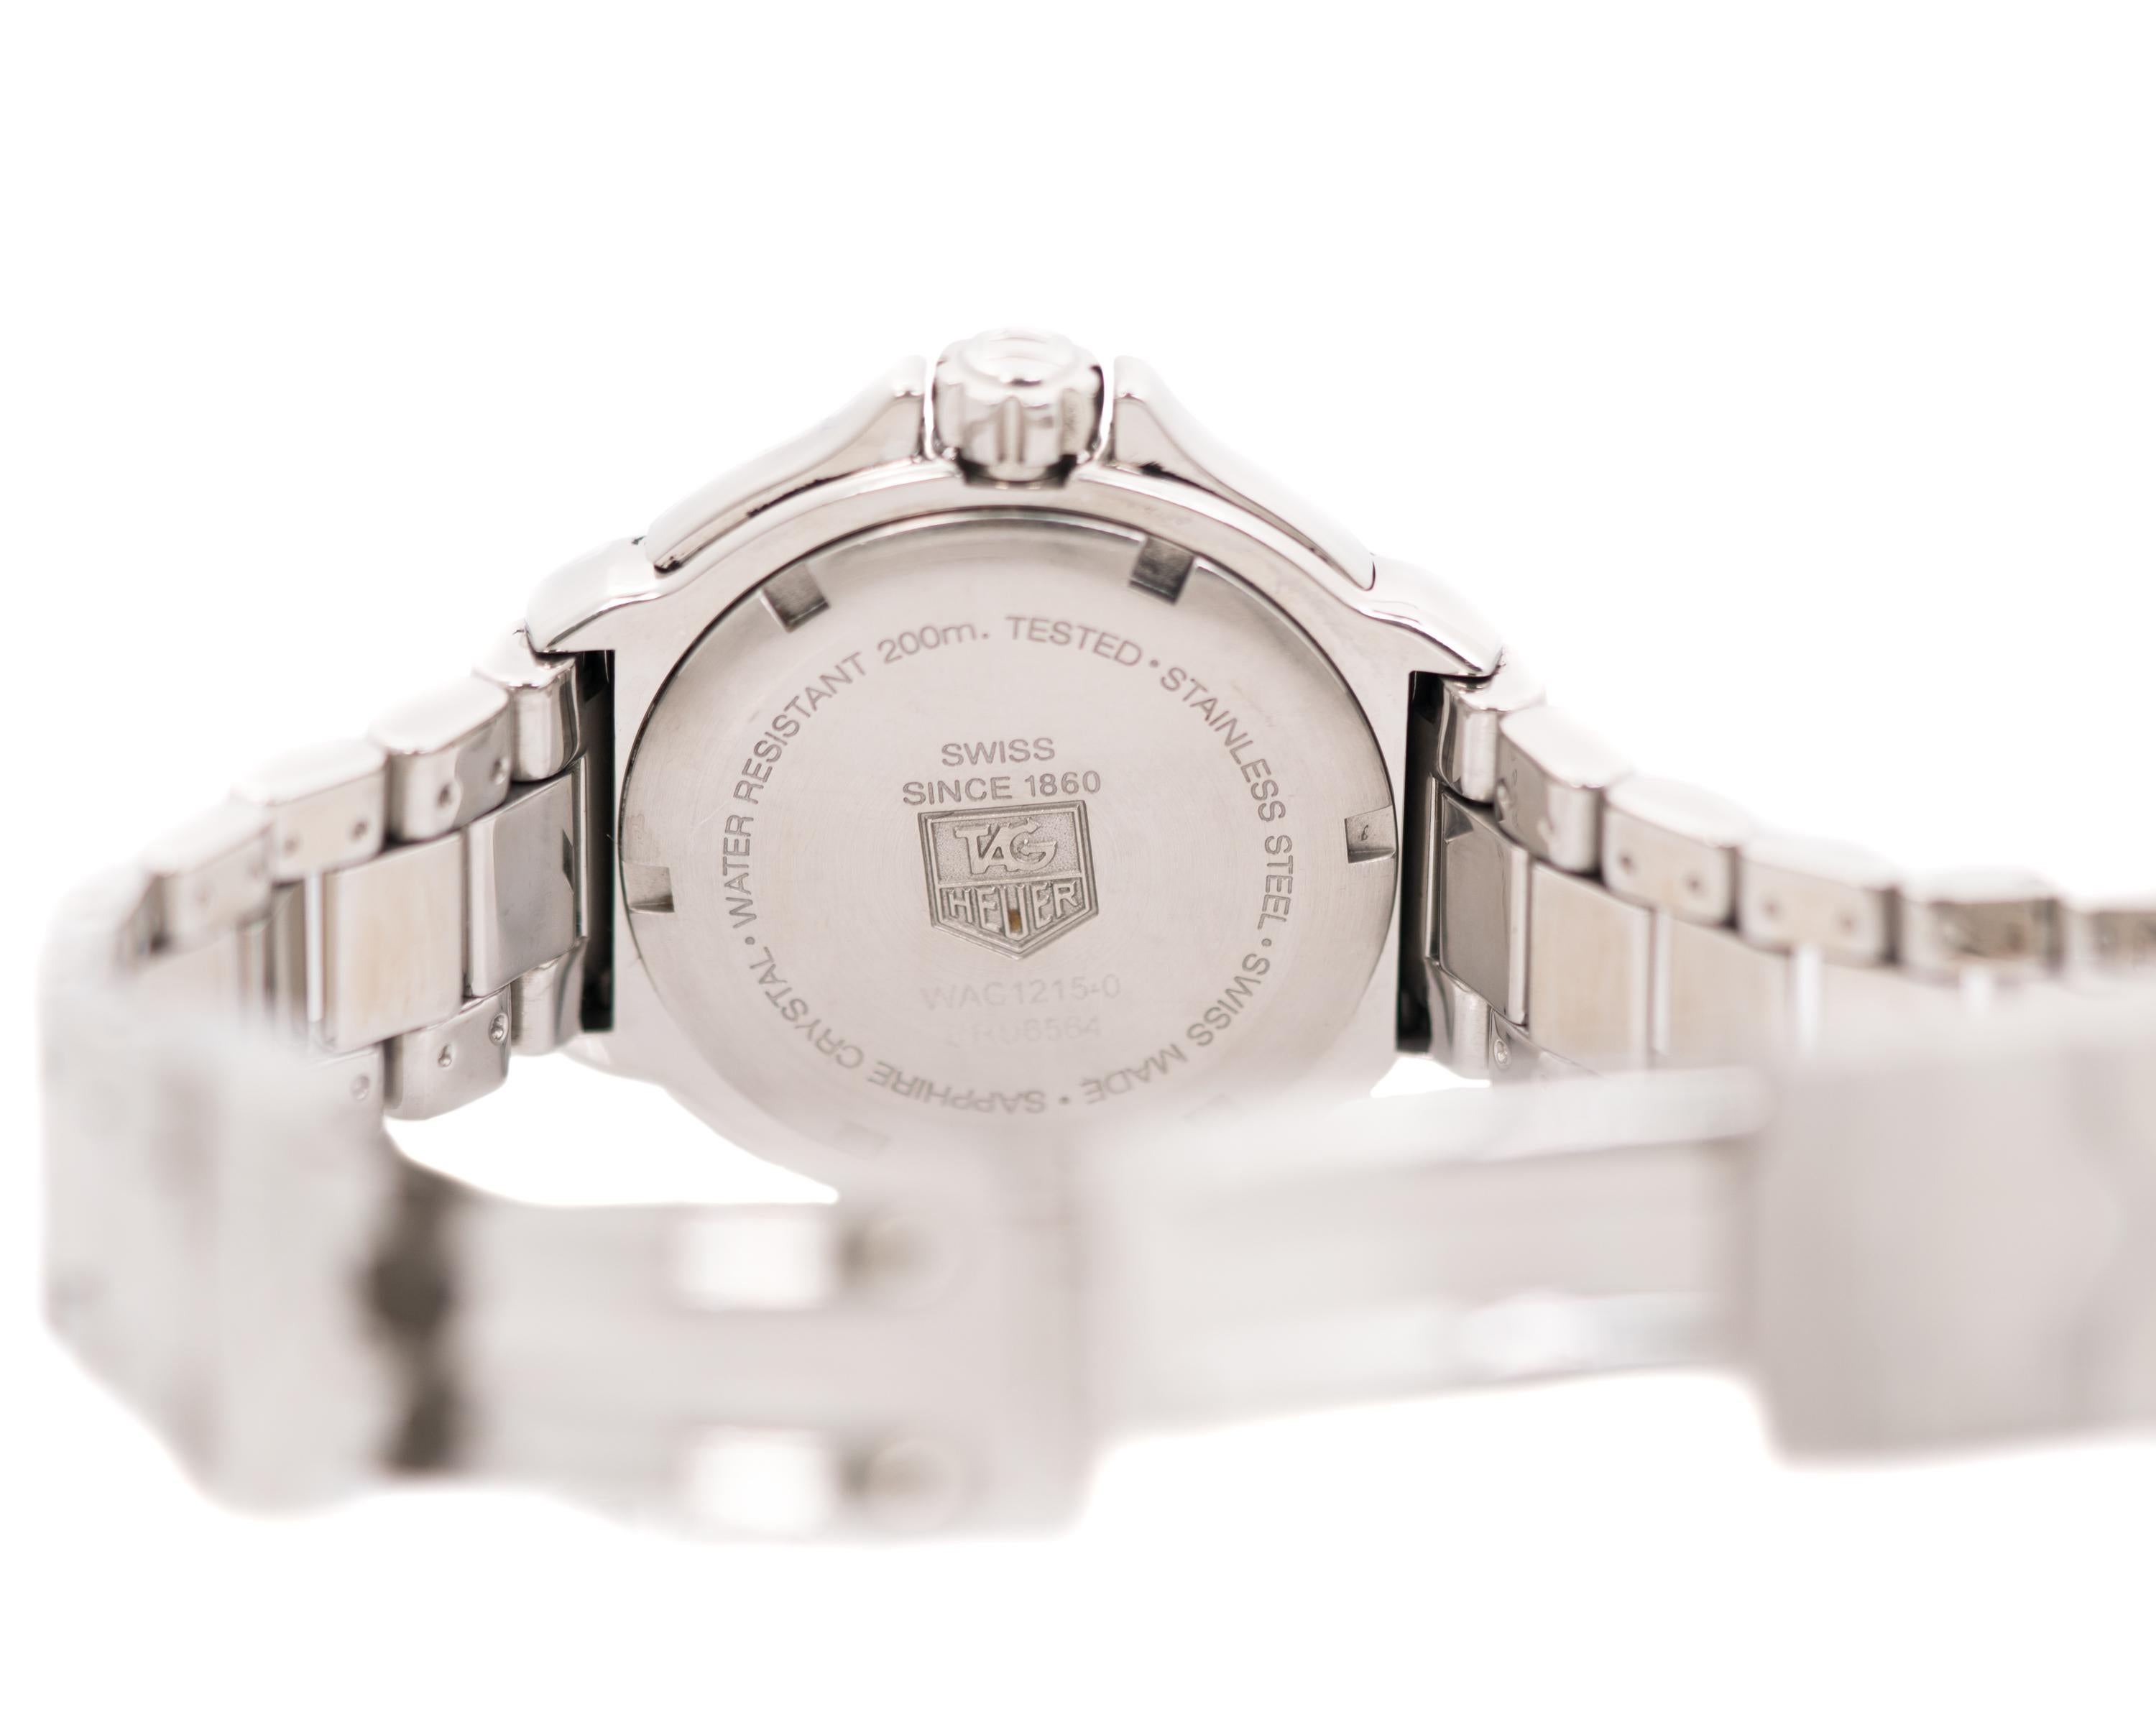 TAG Heuer Formula 1 Women's Wrist Watch - Stainless Steel, Diamonds

Features:
Reference number: WAC1215-0
TAG Heuer Precious Stones Certificate number: WAC1215.BA0852
37 millimeter Case Diameter
Water Resistant up to 200 meters
Stainless steel case